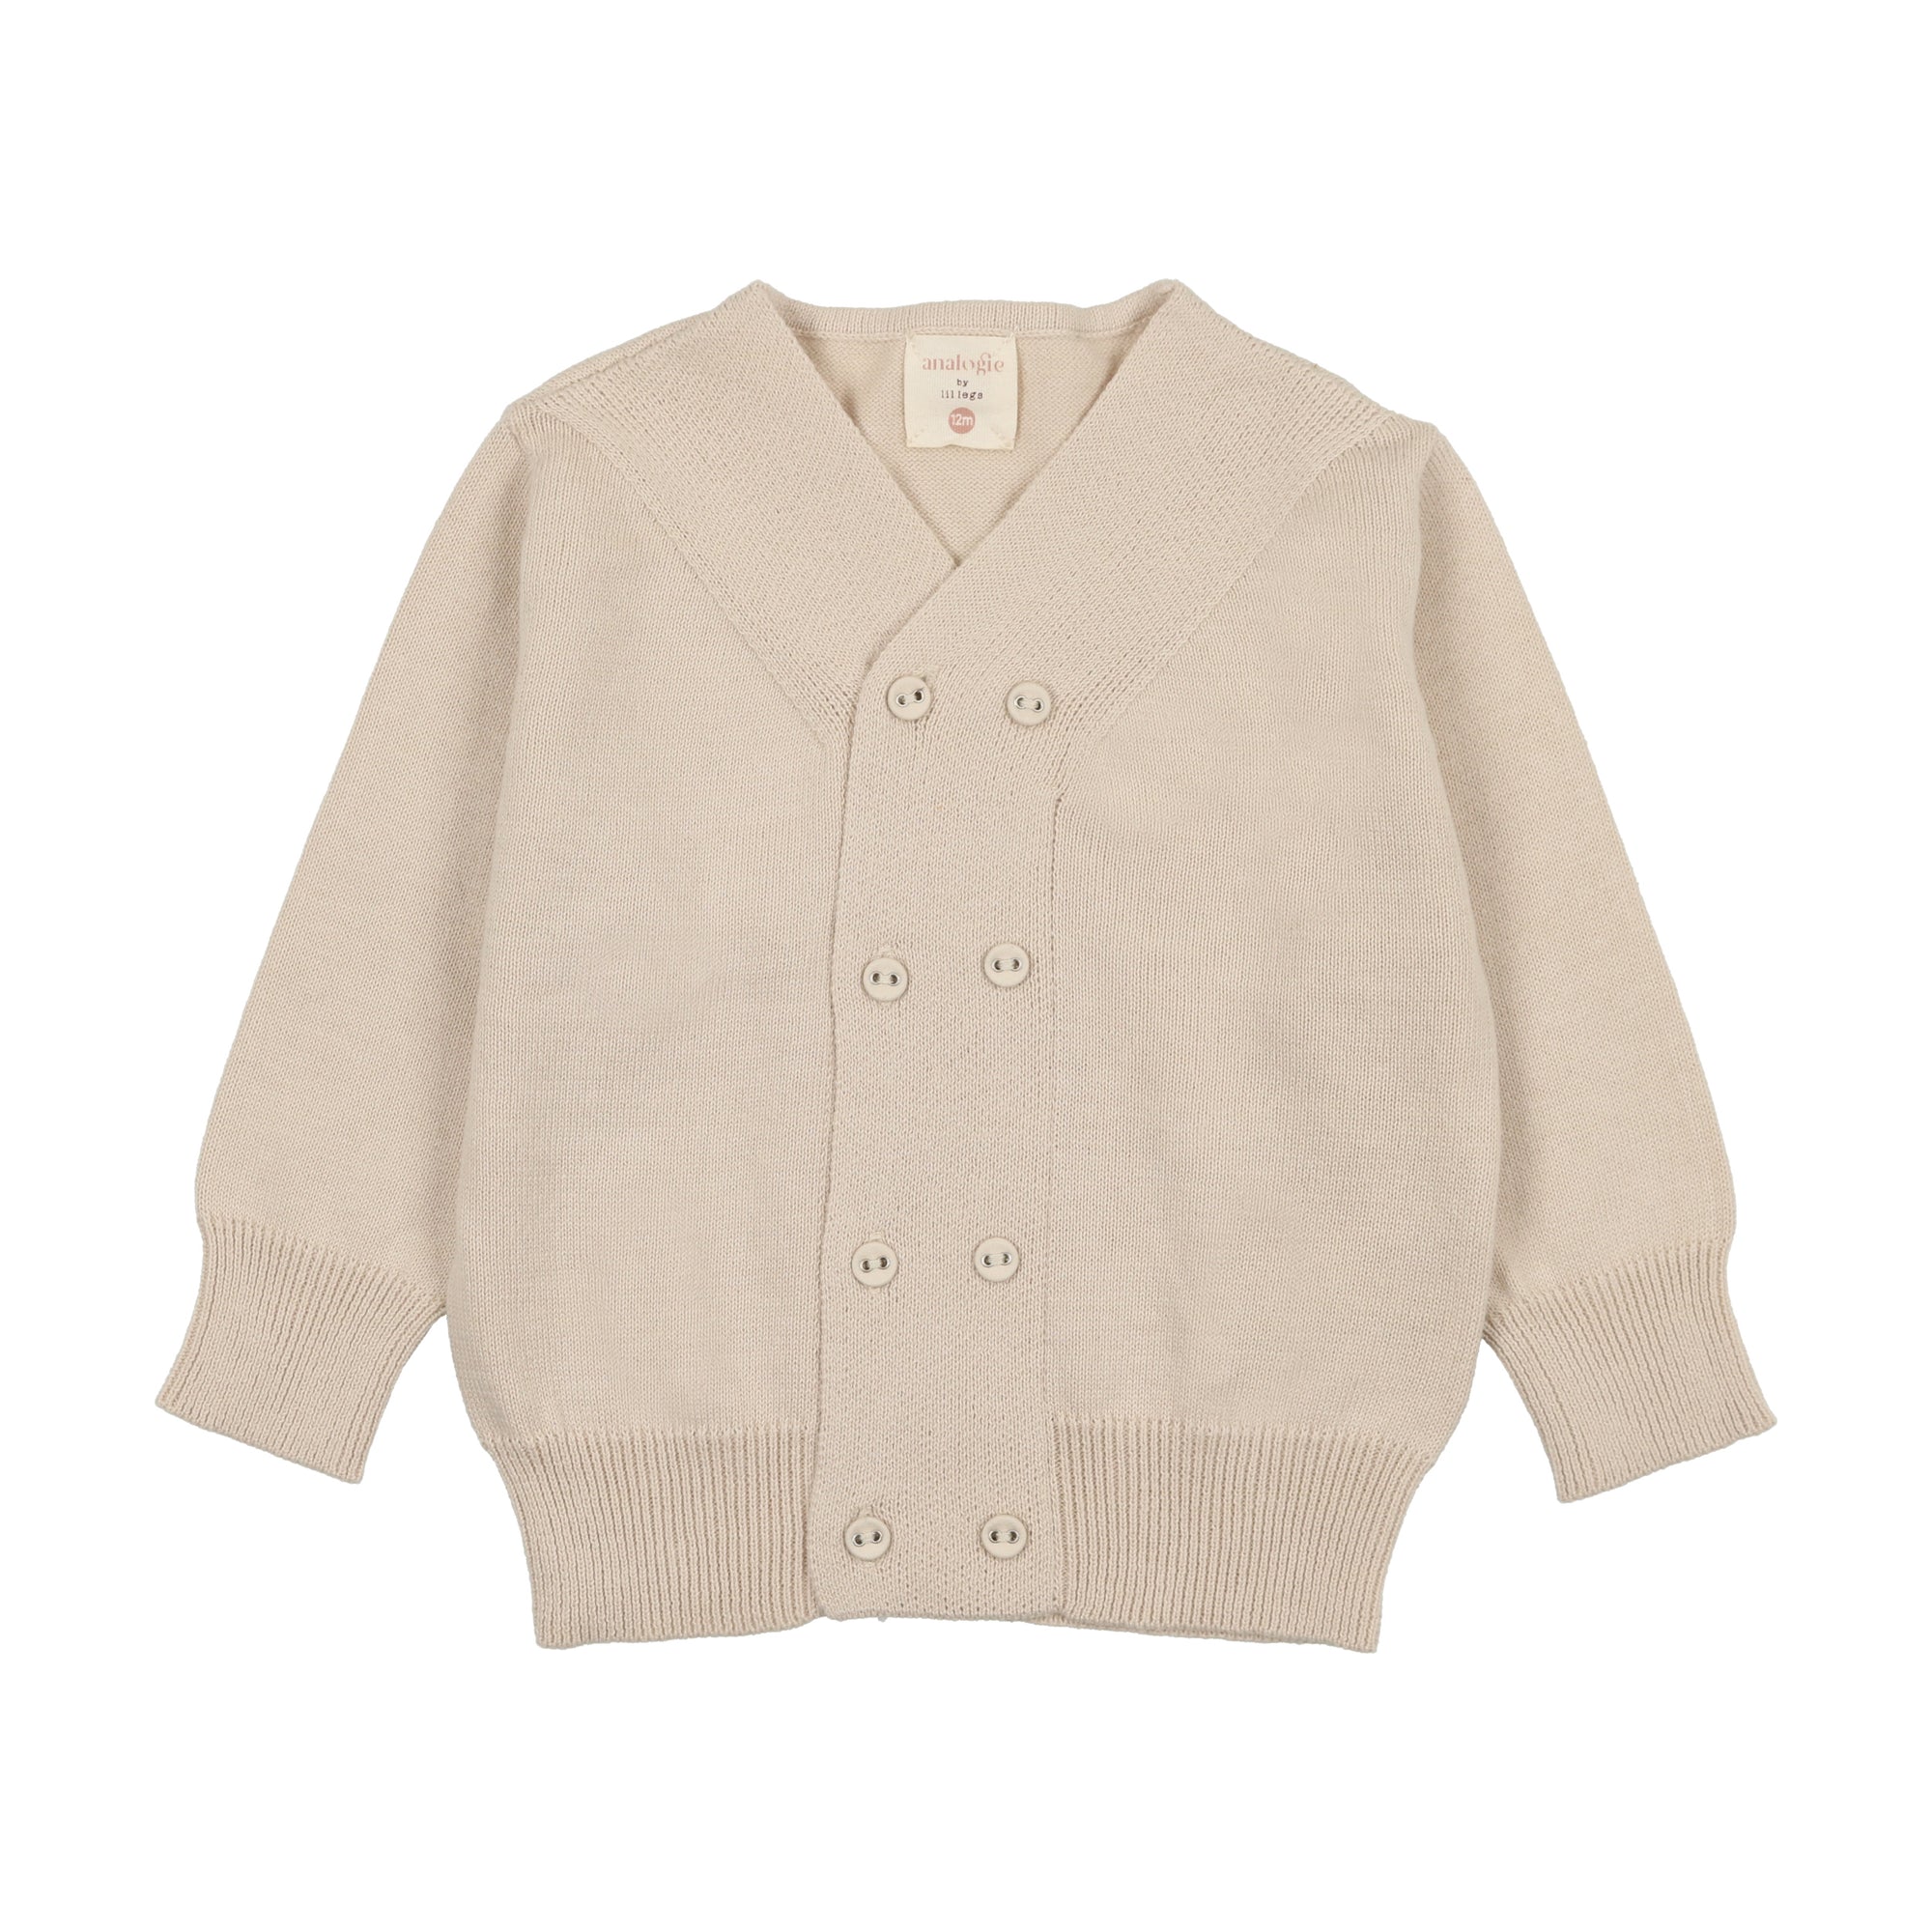 Lil Legs Miami - Shoppe Oat The – Breasted Double Cardigan